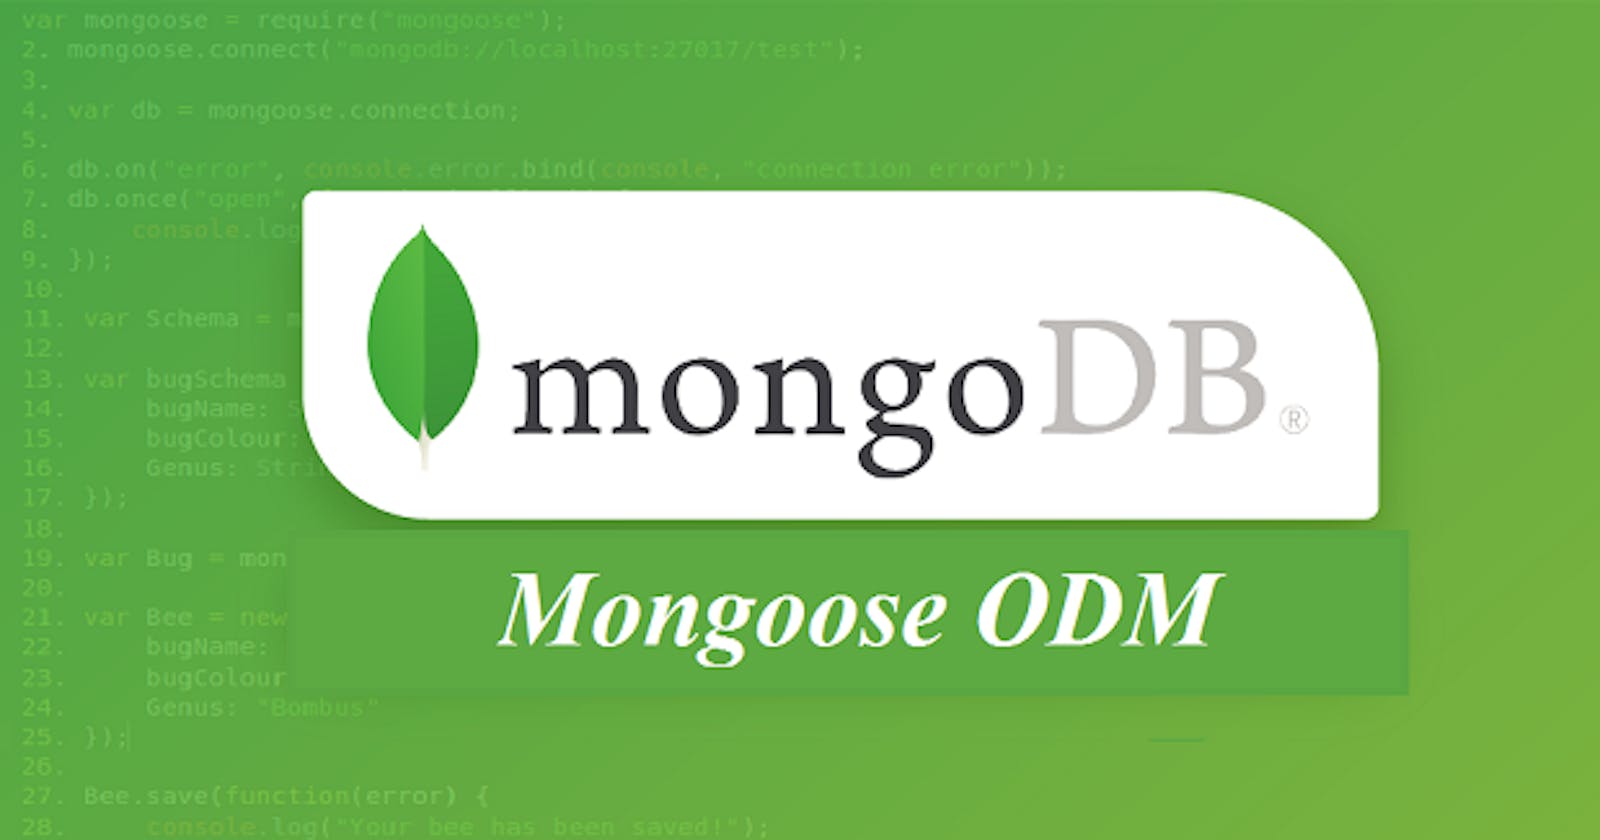 How to Add, Remove and Update items in a MongoDB Array using Mongoose